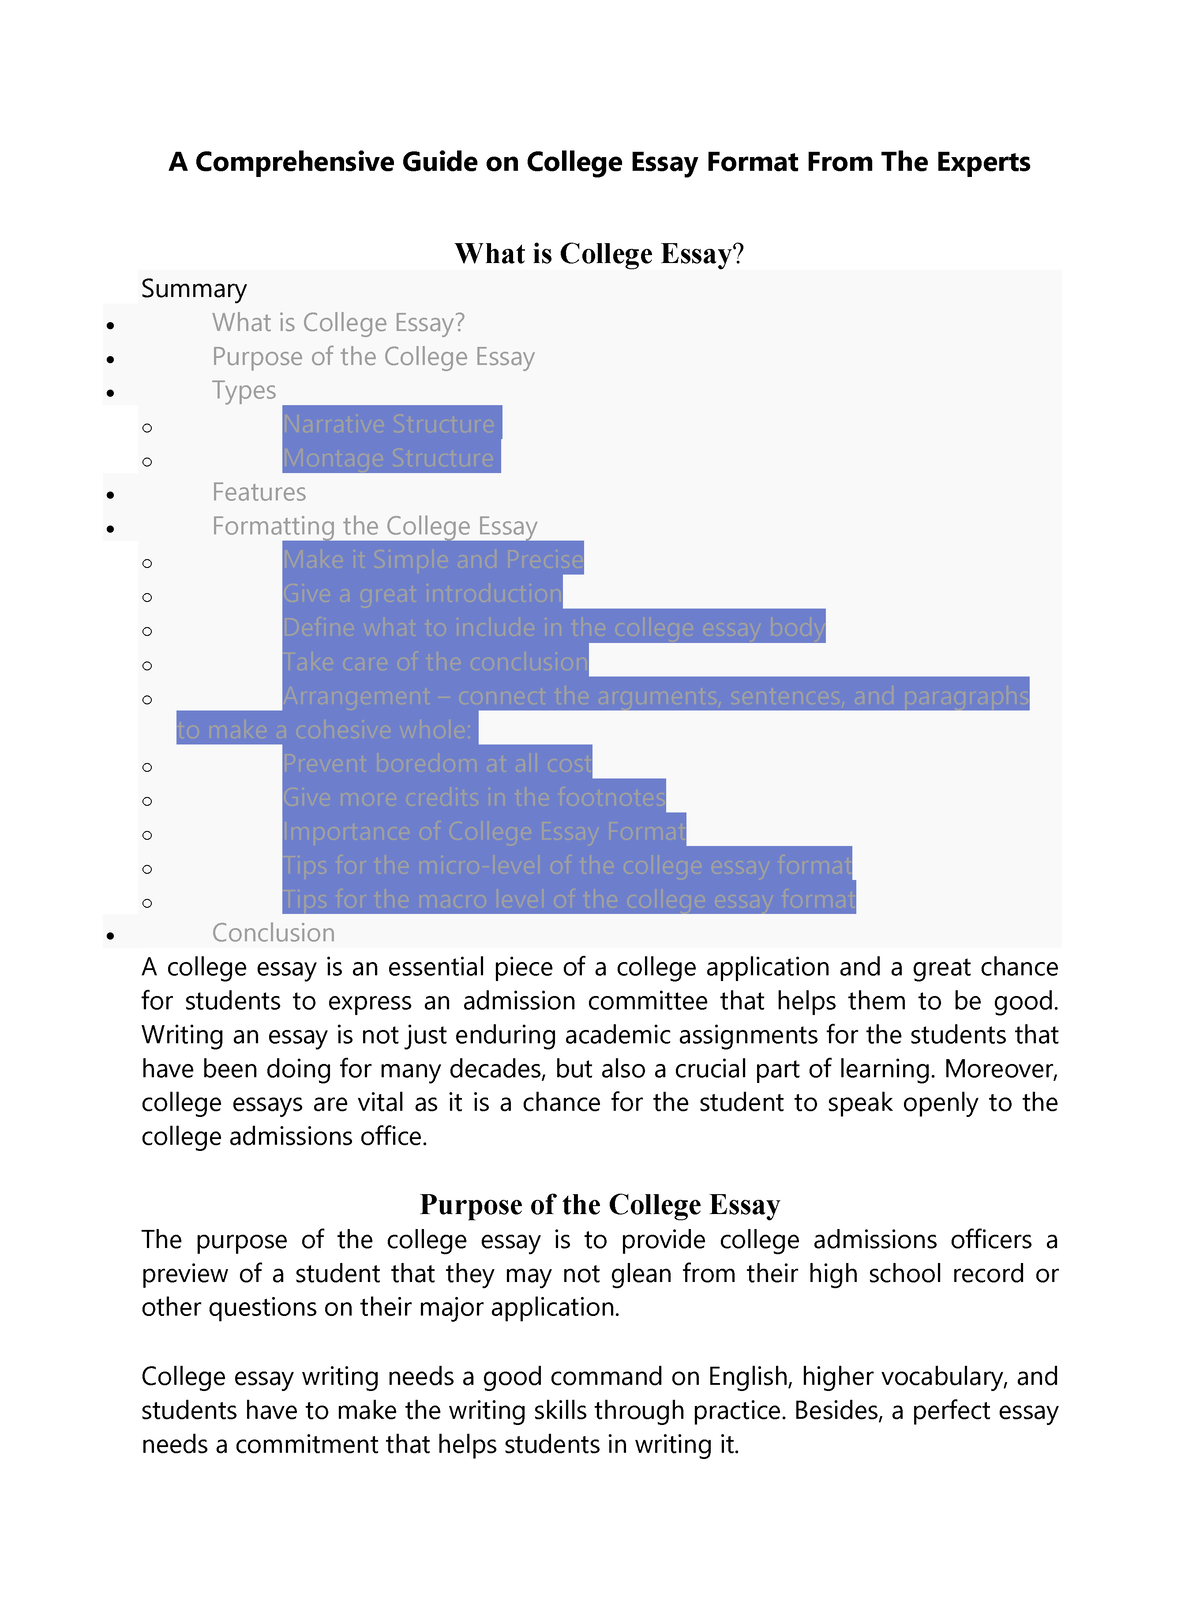 what reading level should your college essay be